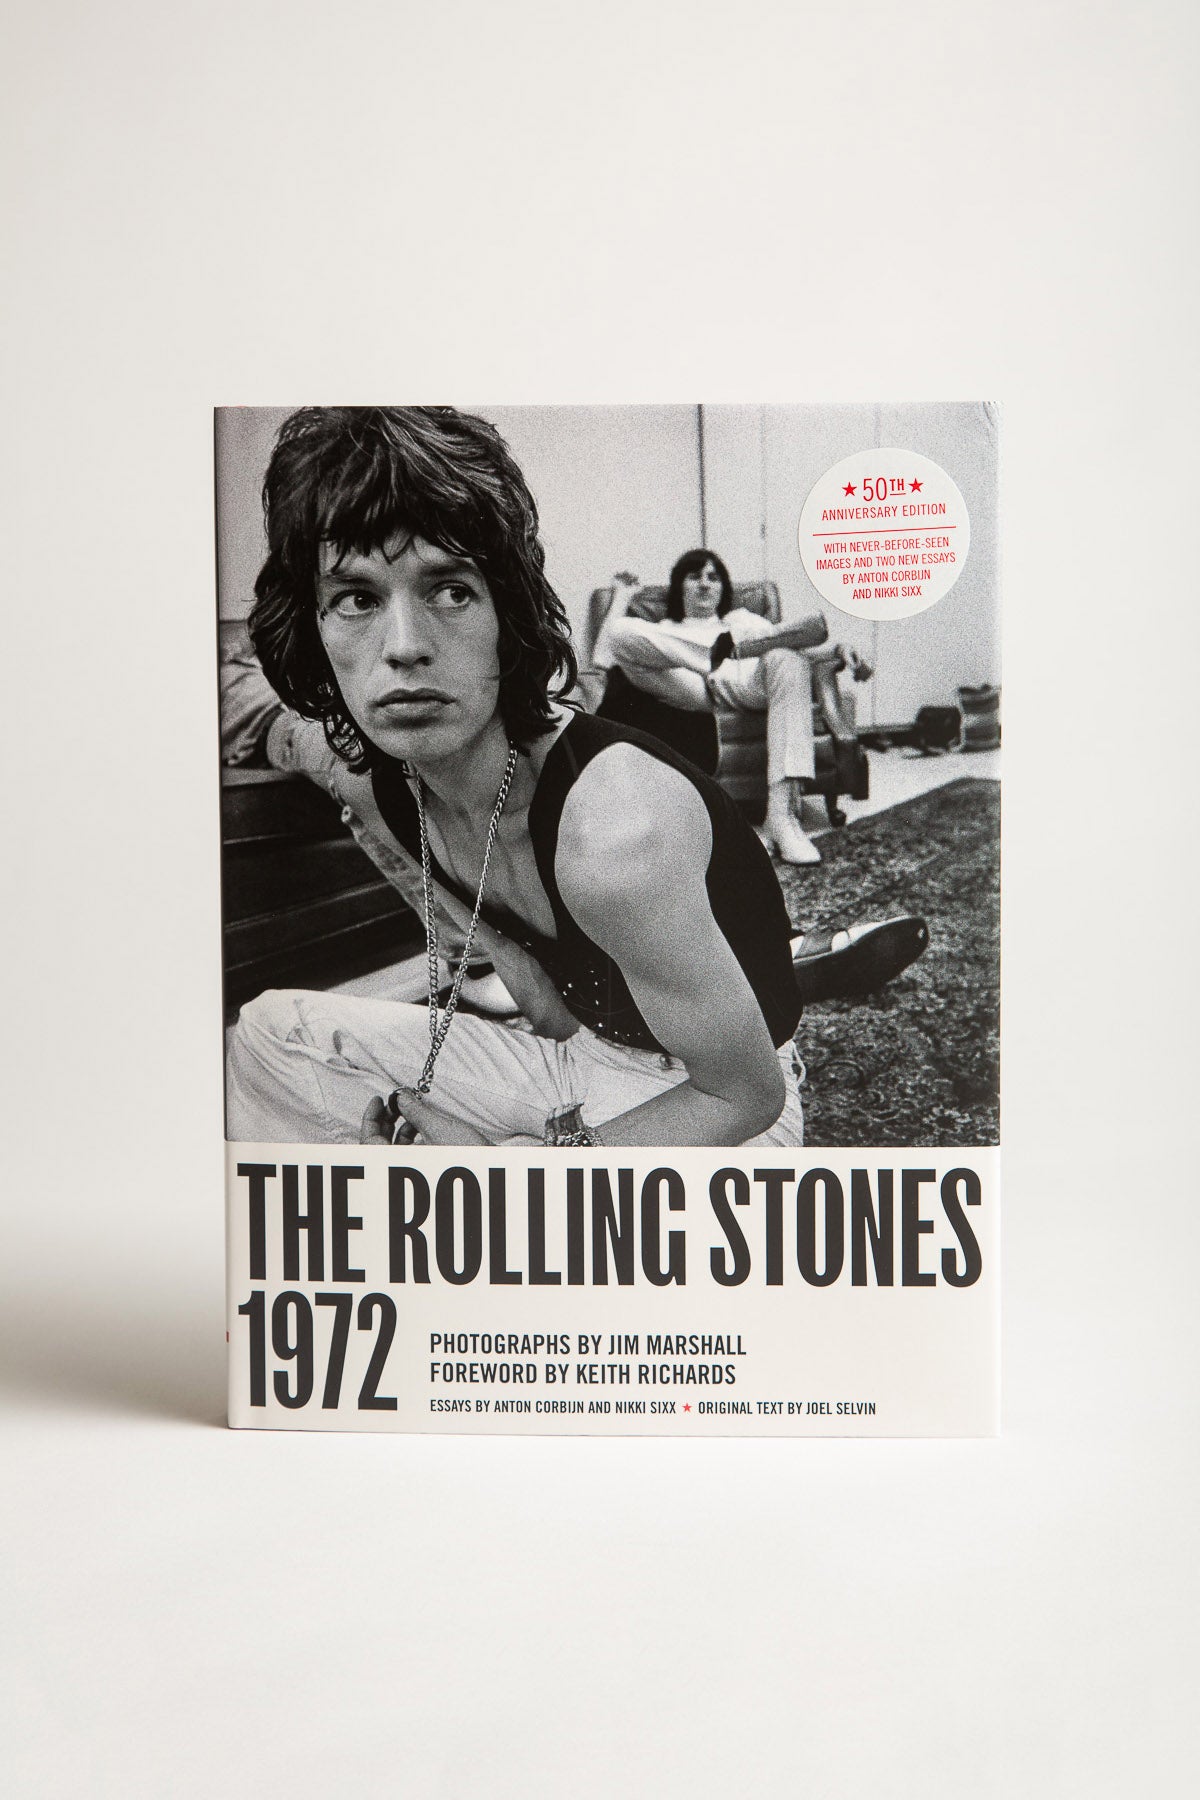 CHRONICLE | ROLLING STONES 1972: 50TH ANNIVERSARY EDITION